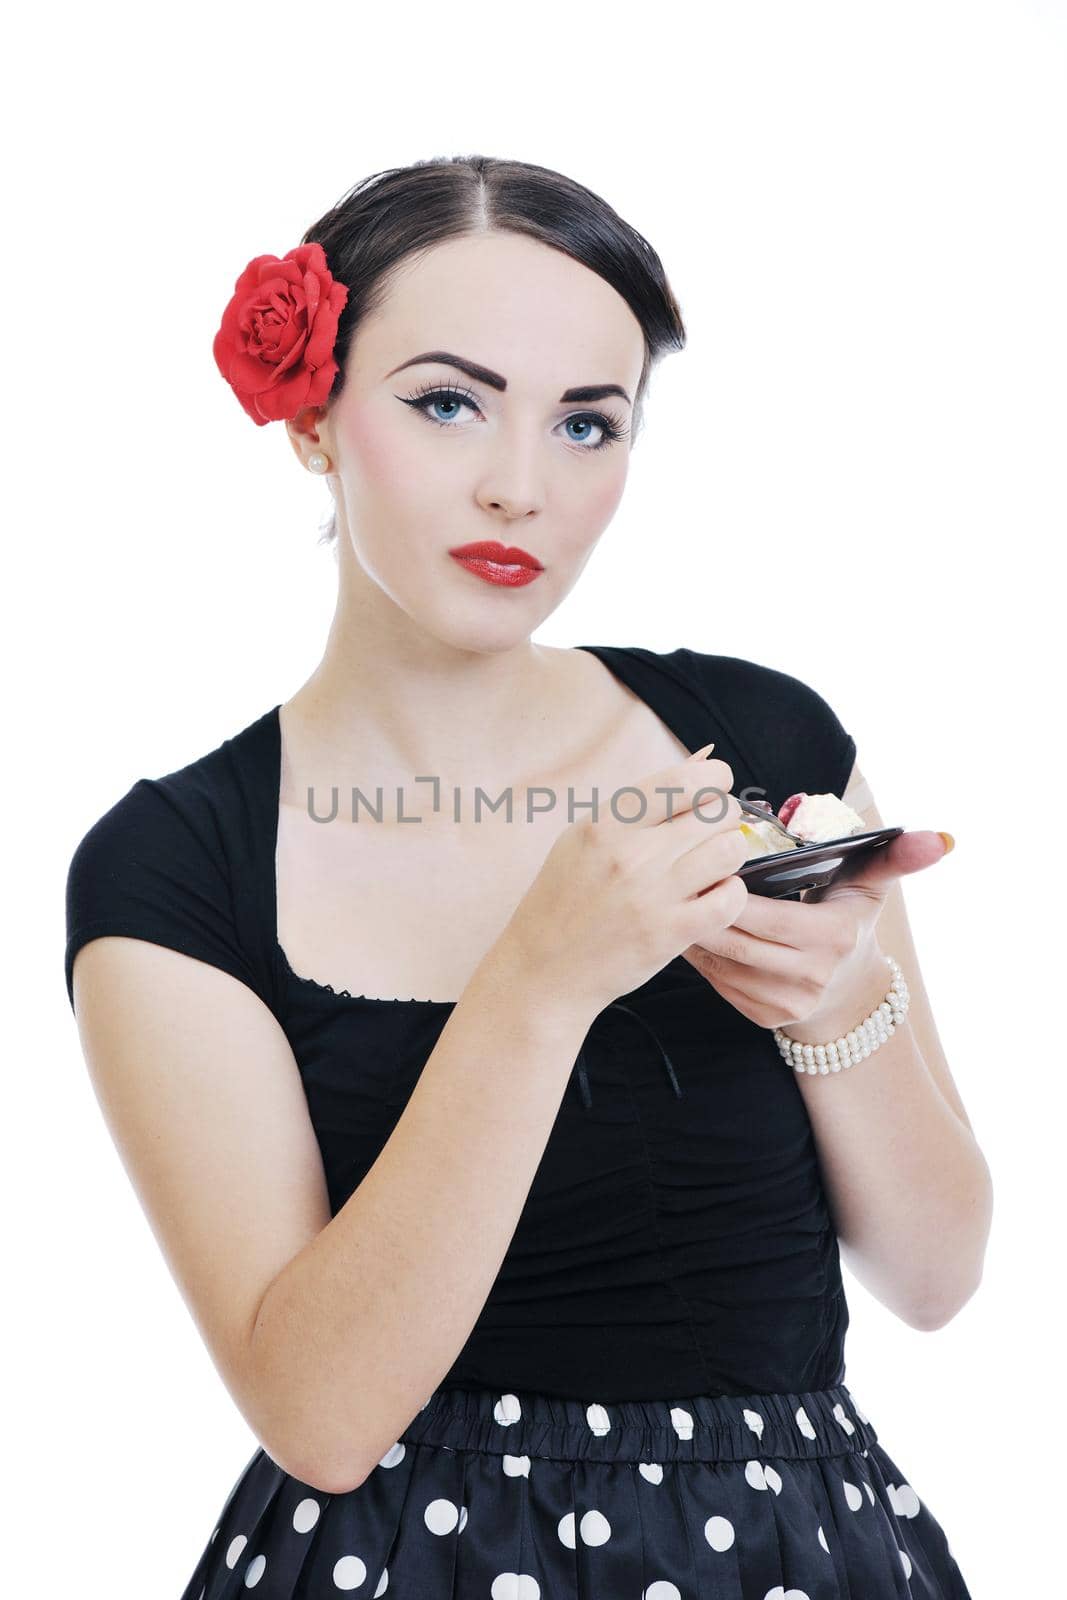 beautiful young retro pinup  woman eat sweet cake food isolated on white iin studio, representing diet and healthy concept